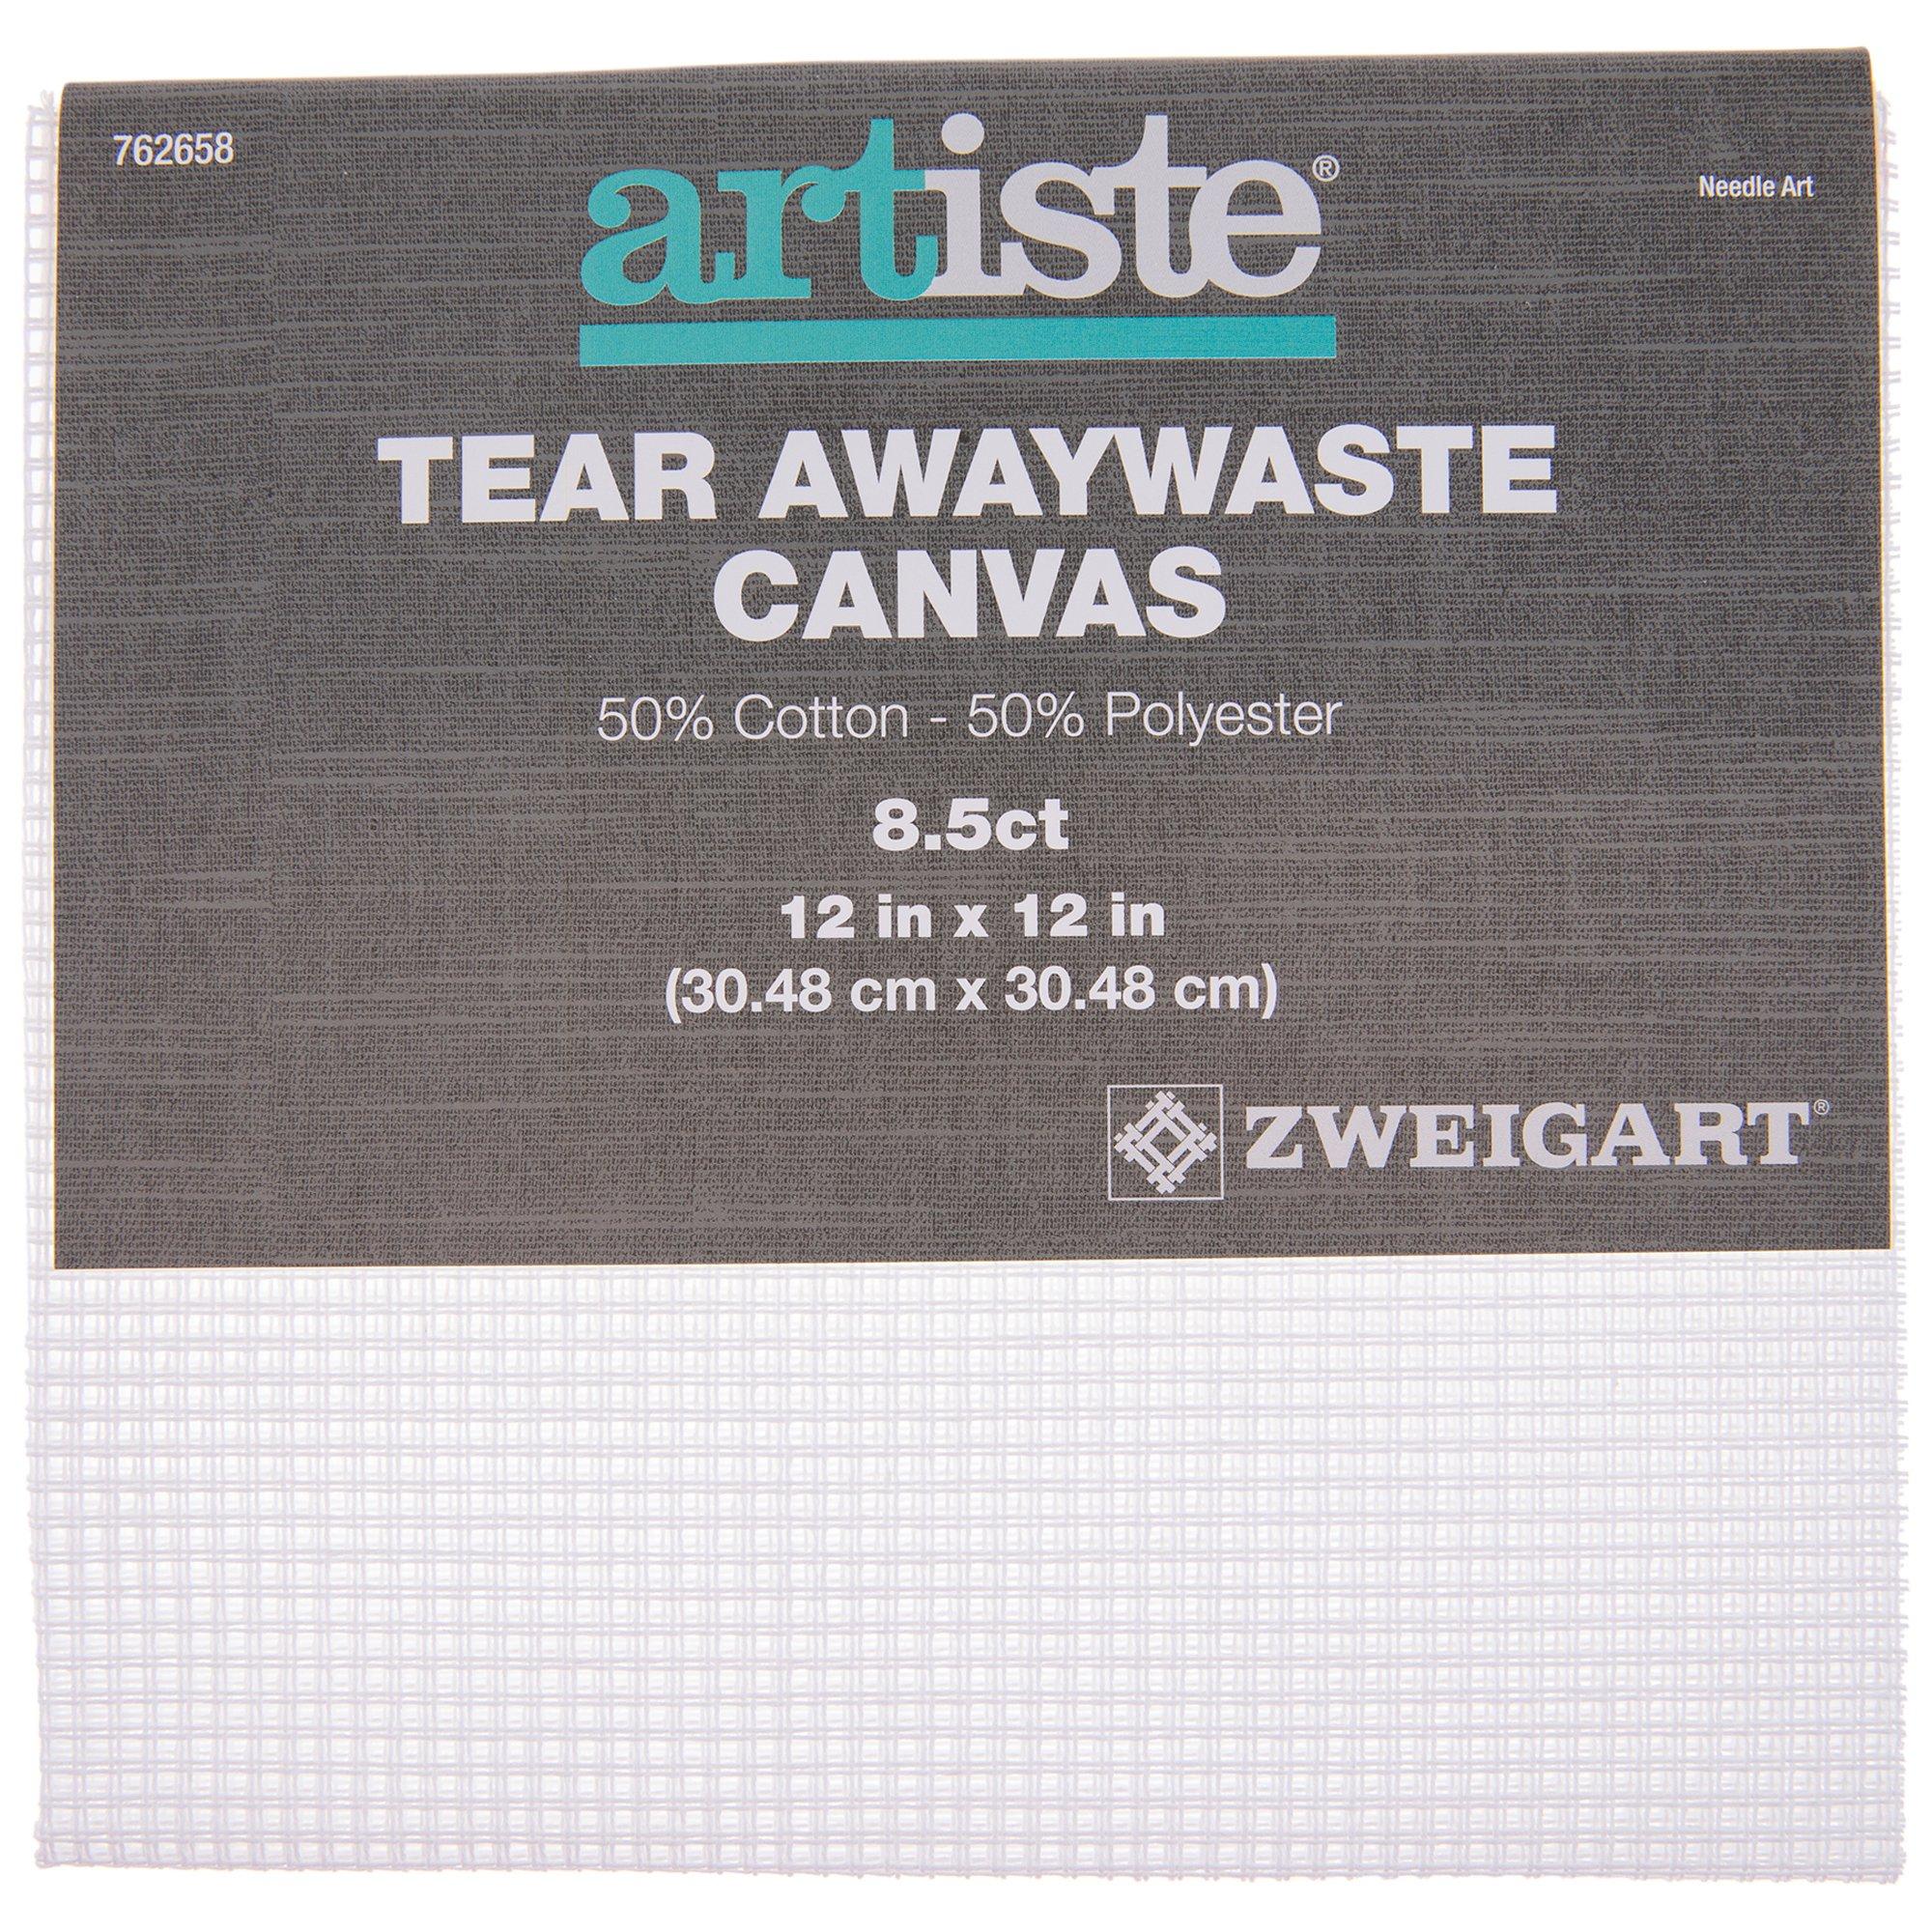 MCG 4 Textiles 14 Count Fid Weave 8.5 Count Tear Away Waste Cross